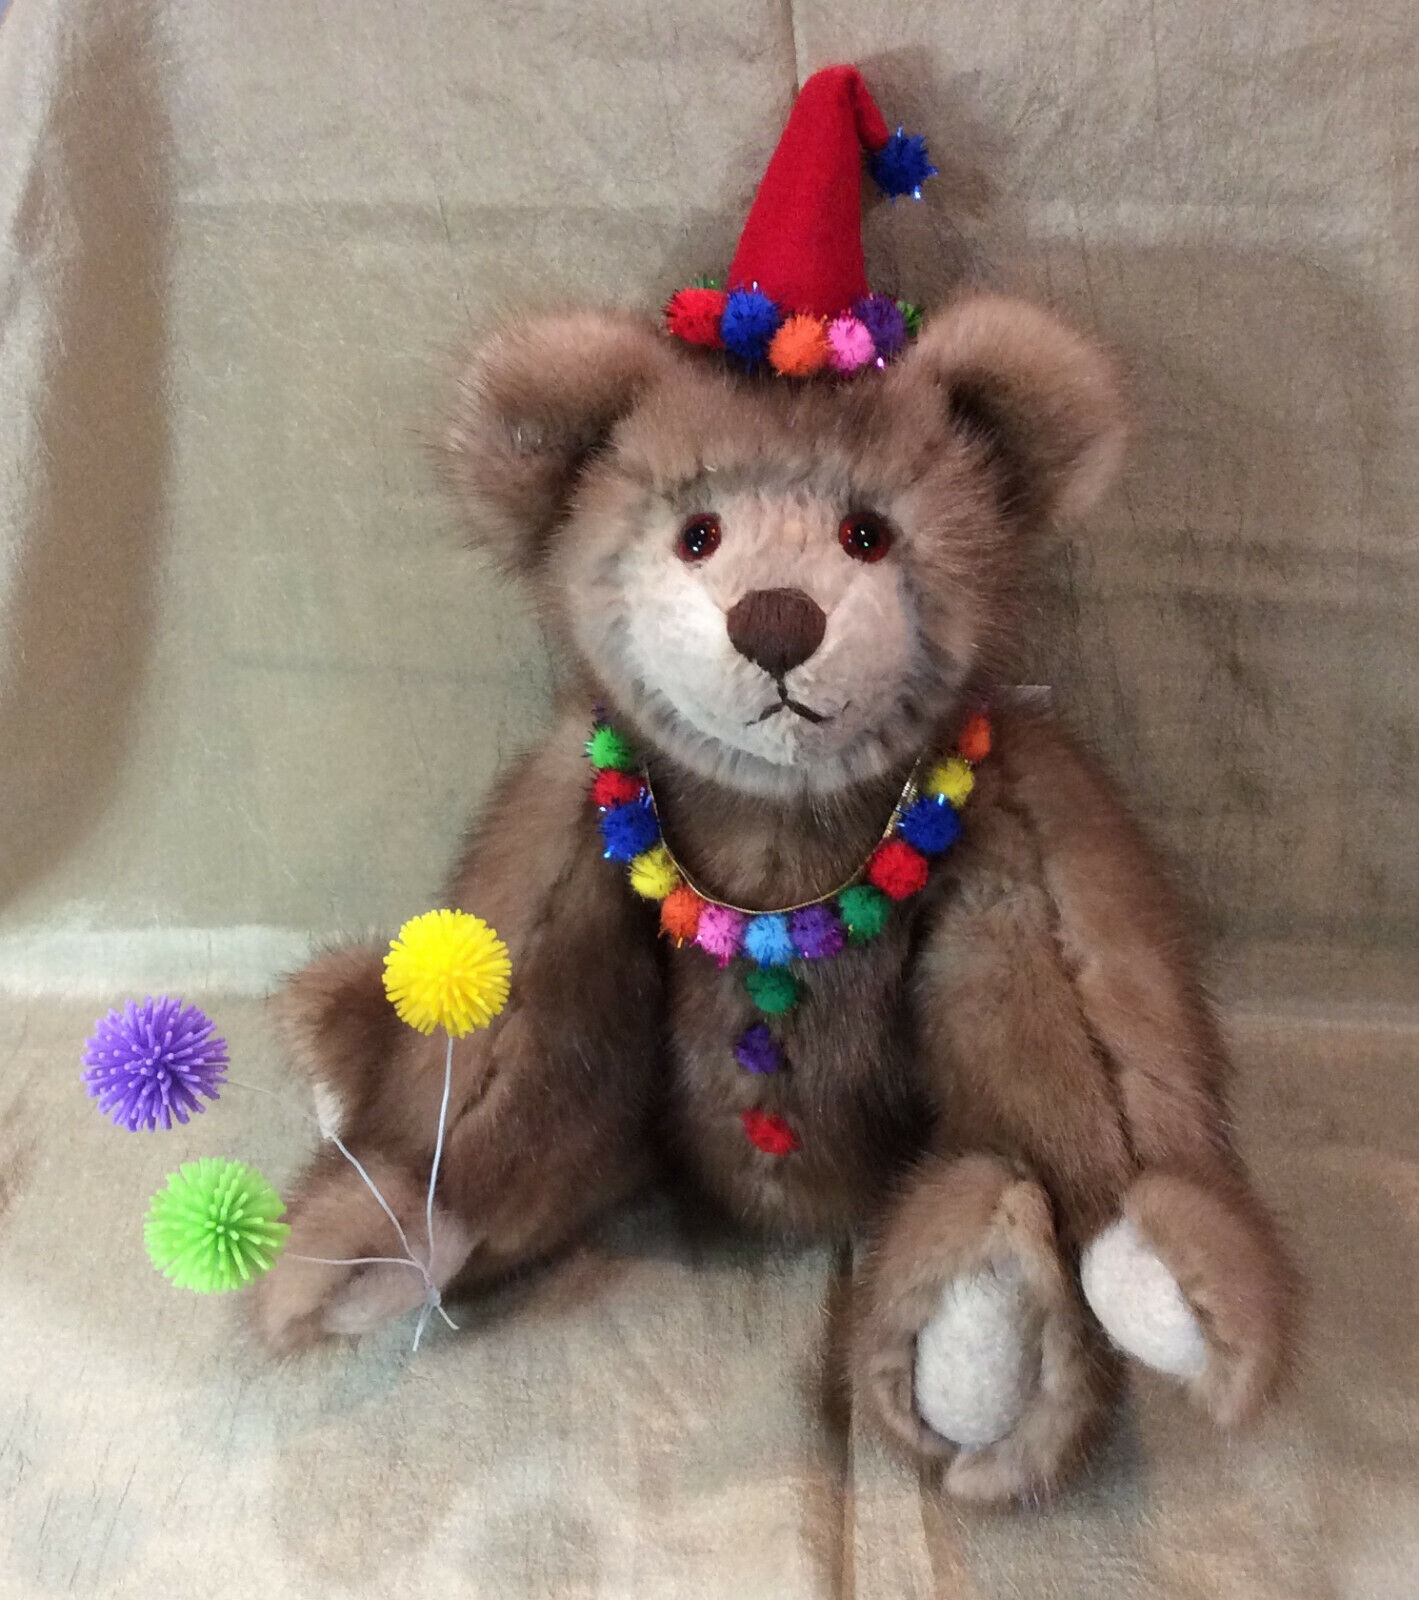 Real Fur Teddy Bear- Handmade, fully jointed and glass eyes